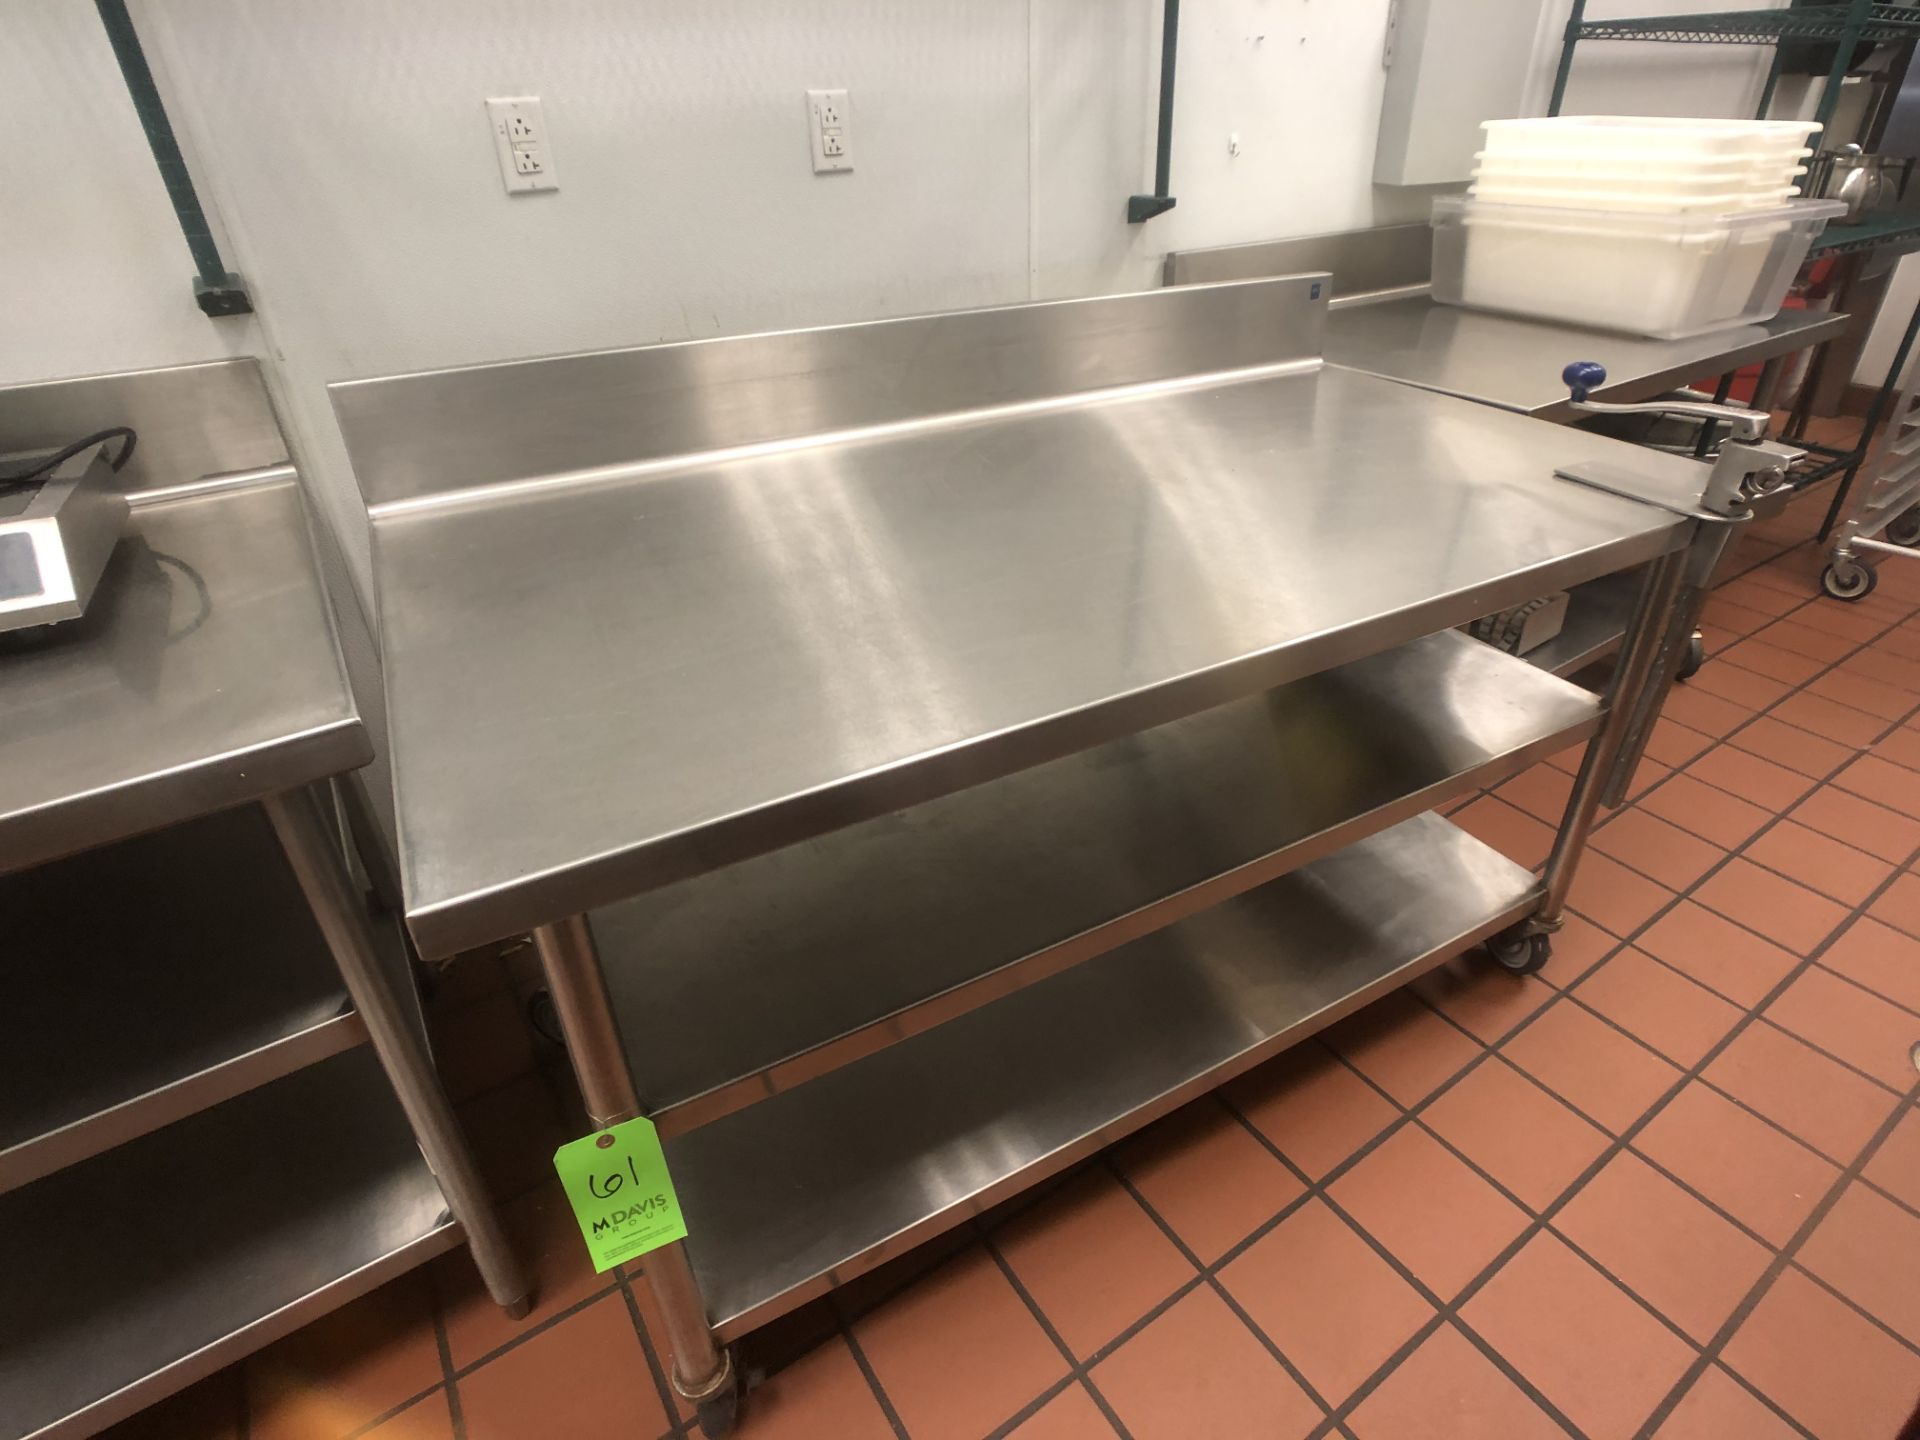 S/S Table with Racks S/S Backsplash and Edlund Can Opener, Approx. 60" L x 32" W, Mounted on